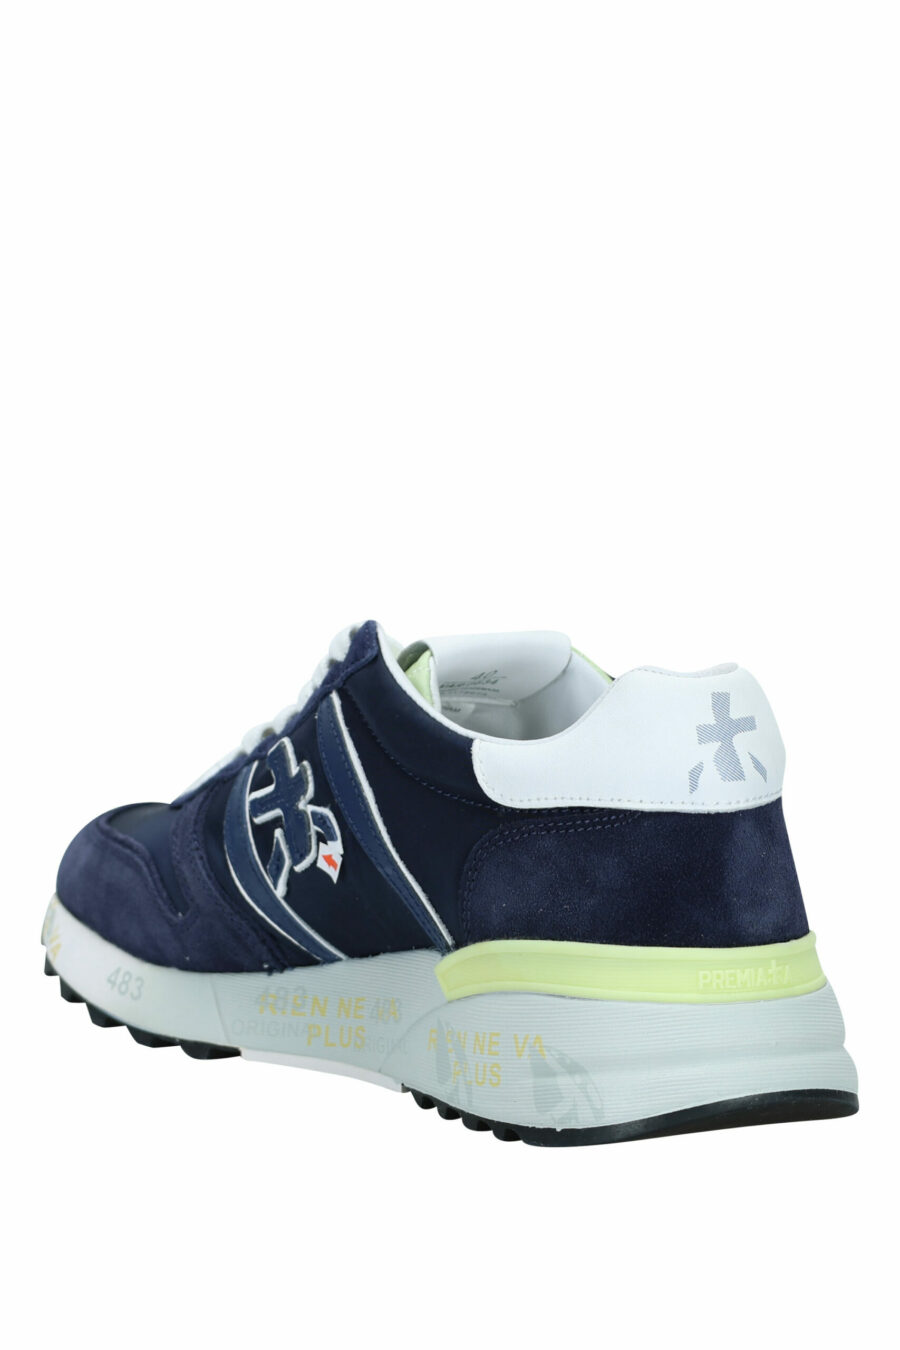 Blue trainers with lime green "Lander 6634" - 8053680268835 3 scaled